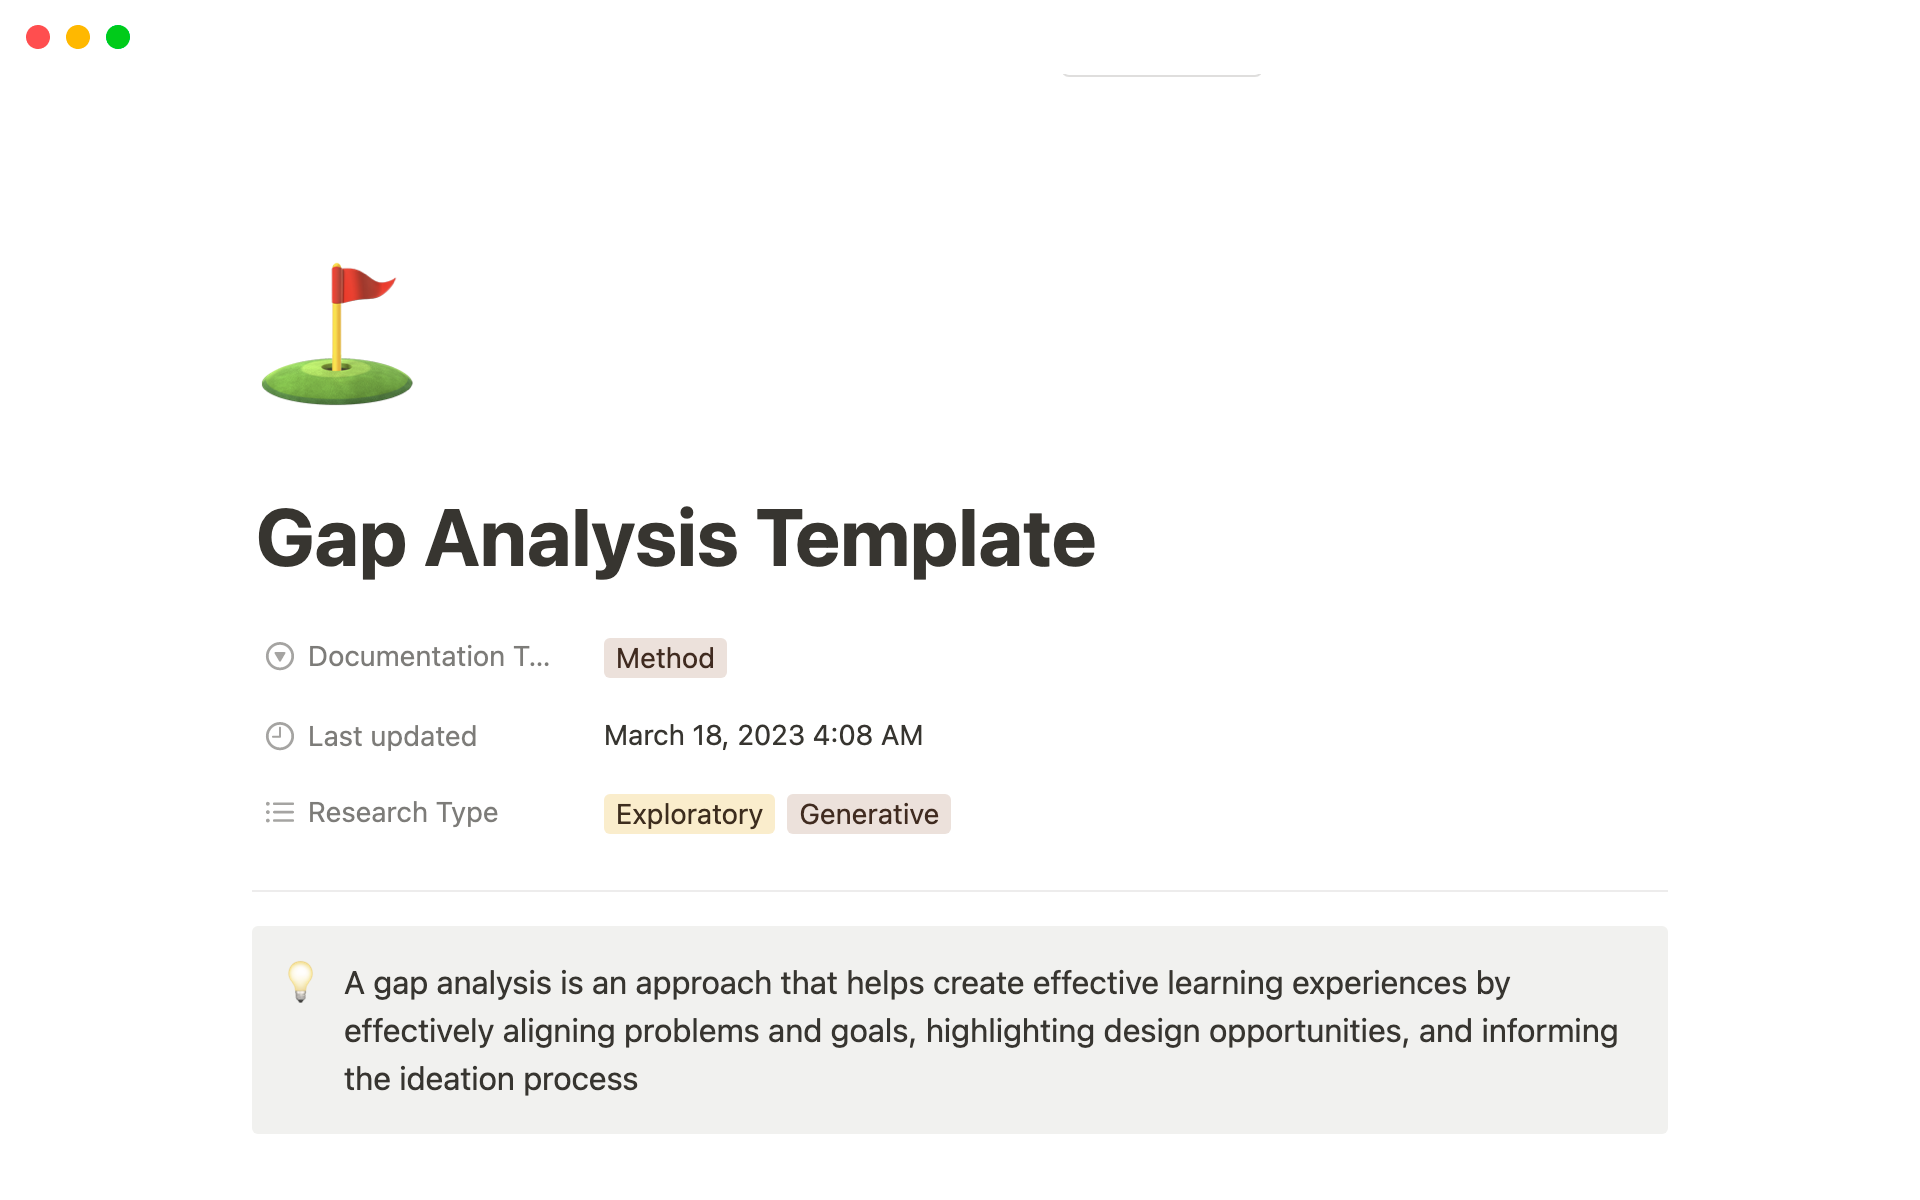 Screenshot of Top 10 Competitive Analysis Templates for Product Development Managers collection by Notion